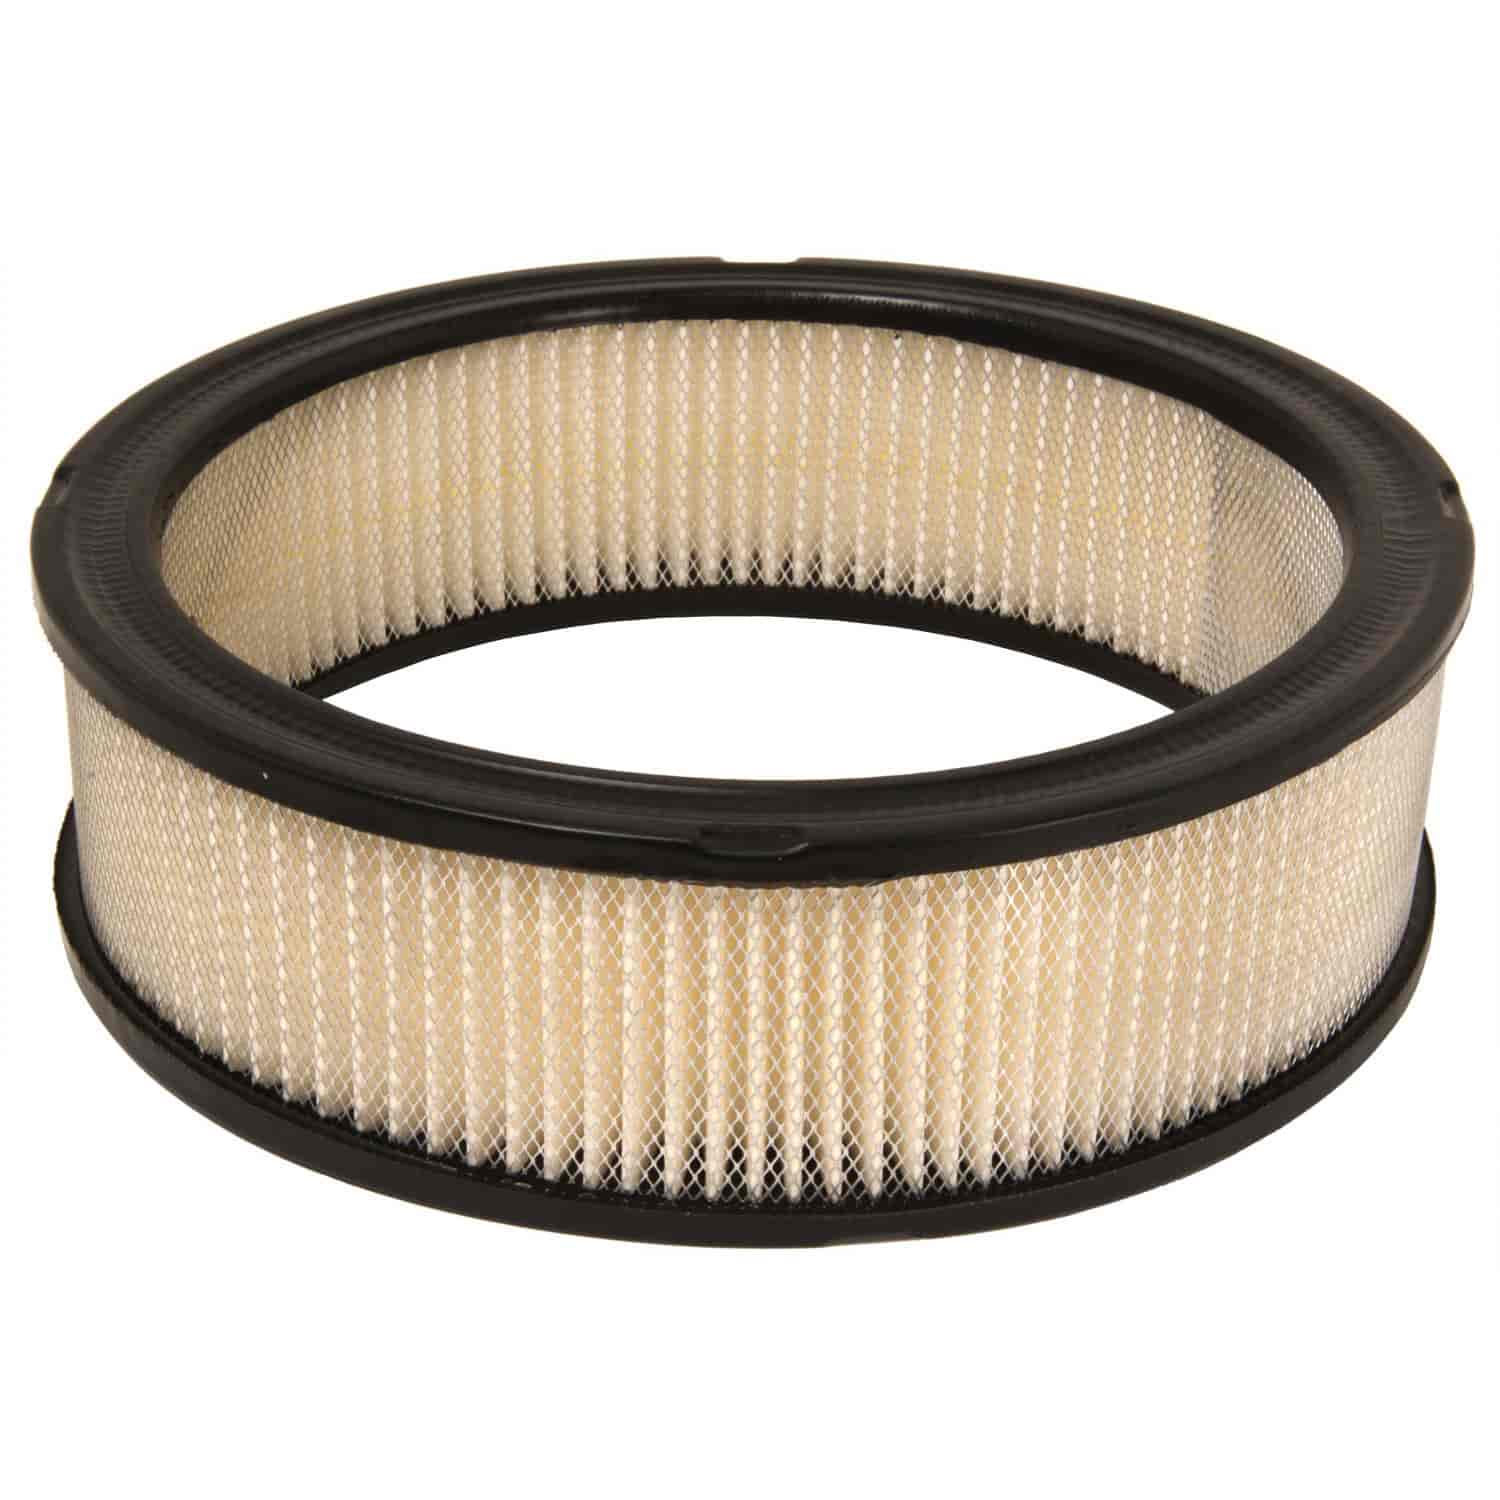 Mahle Air Filter GM Vehicles 81-95 for Nissan Pickups 86-89